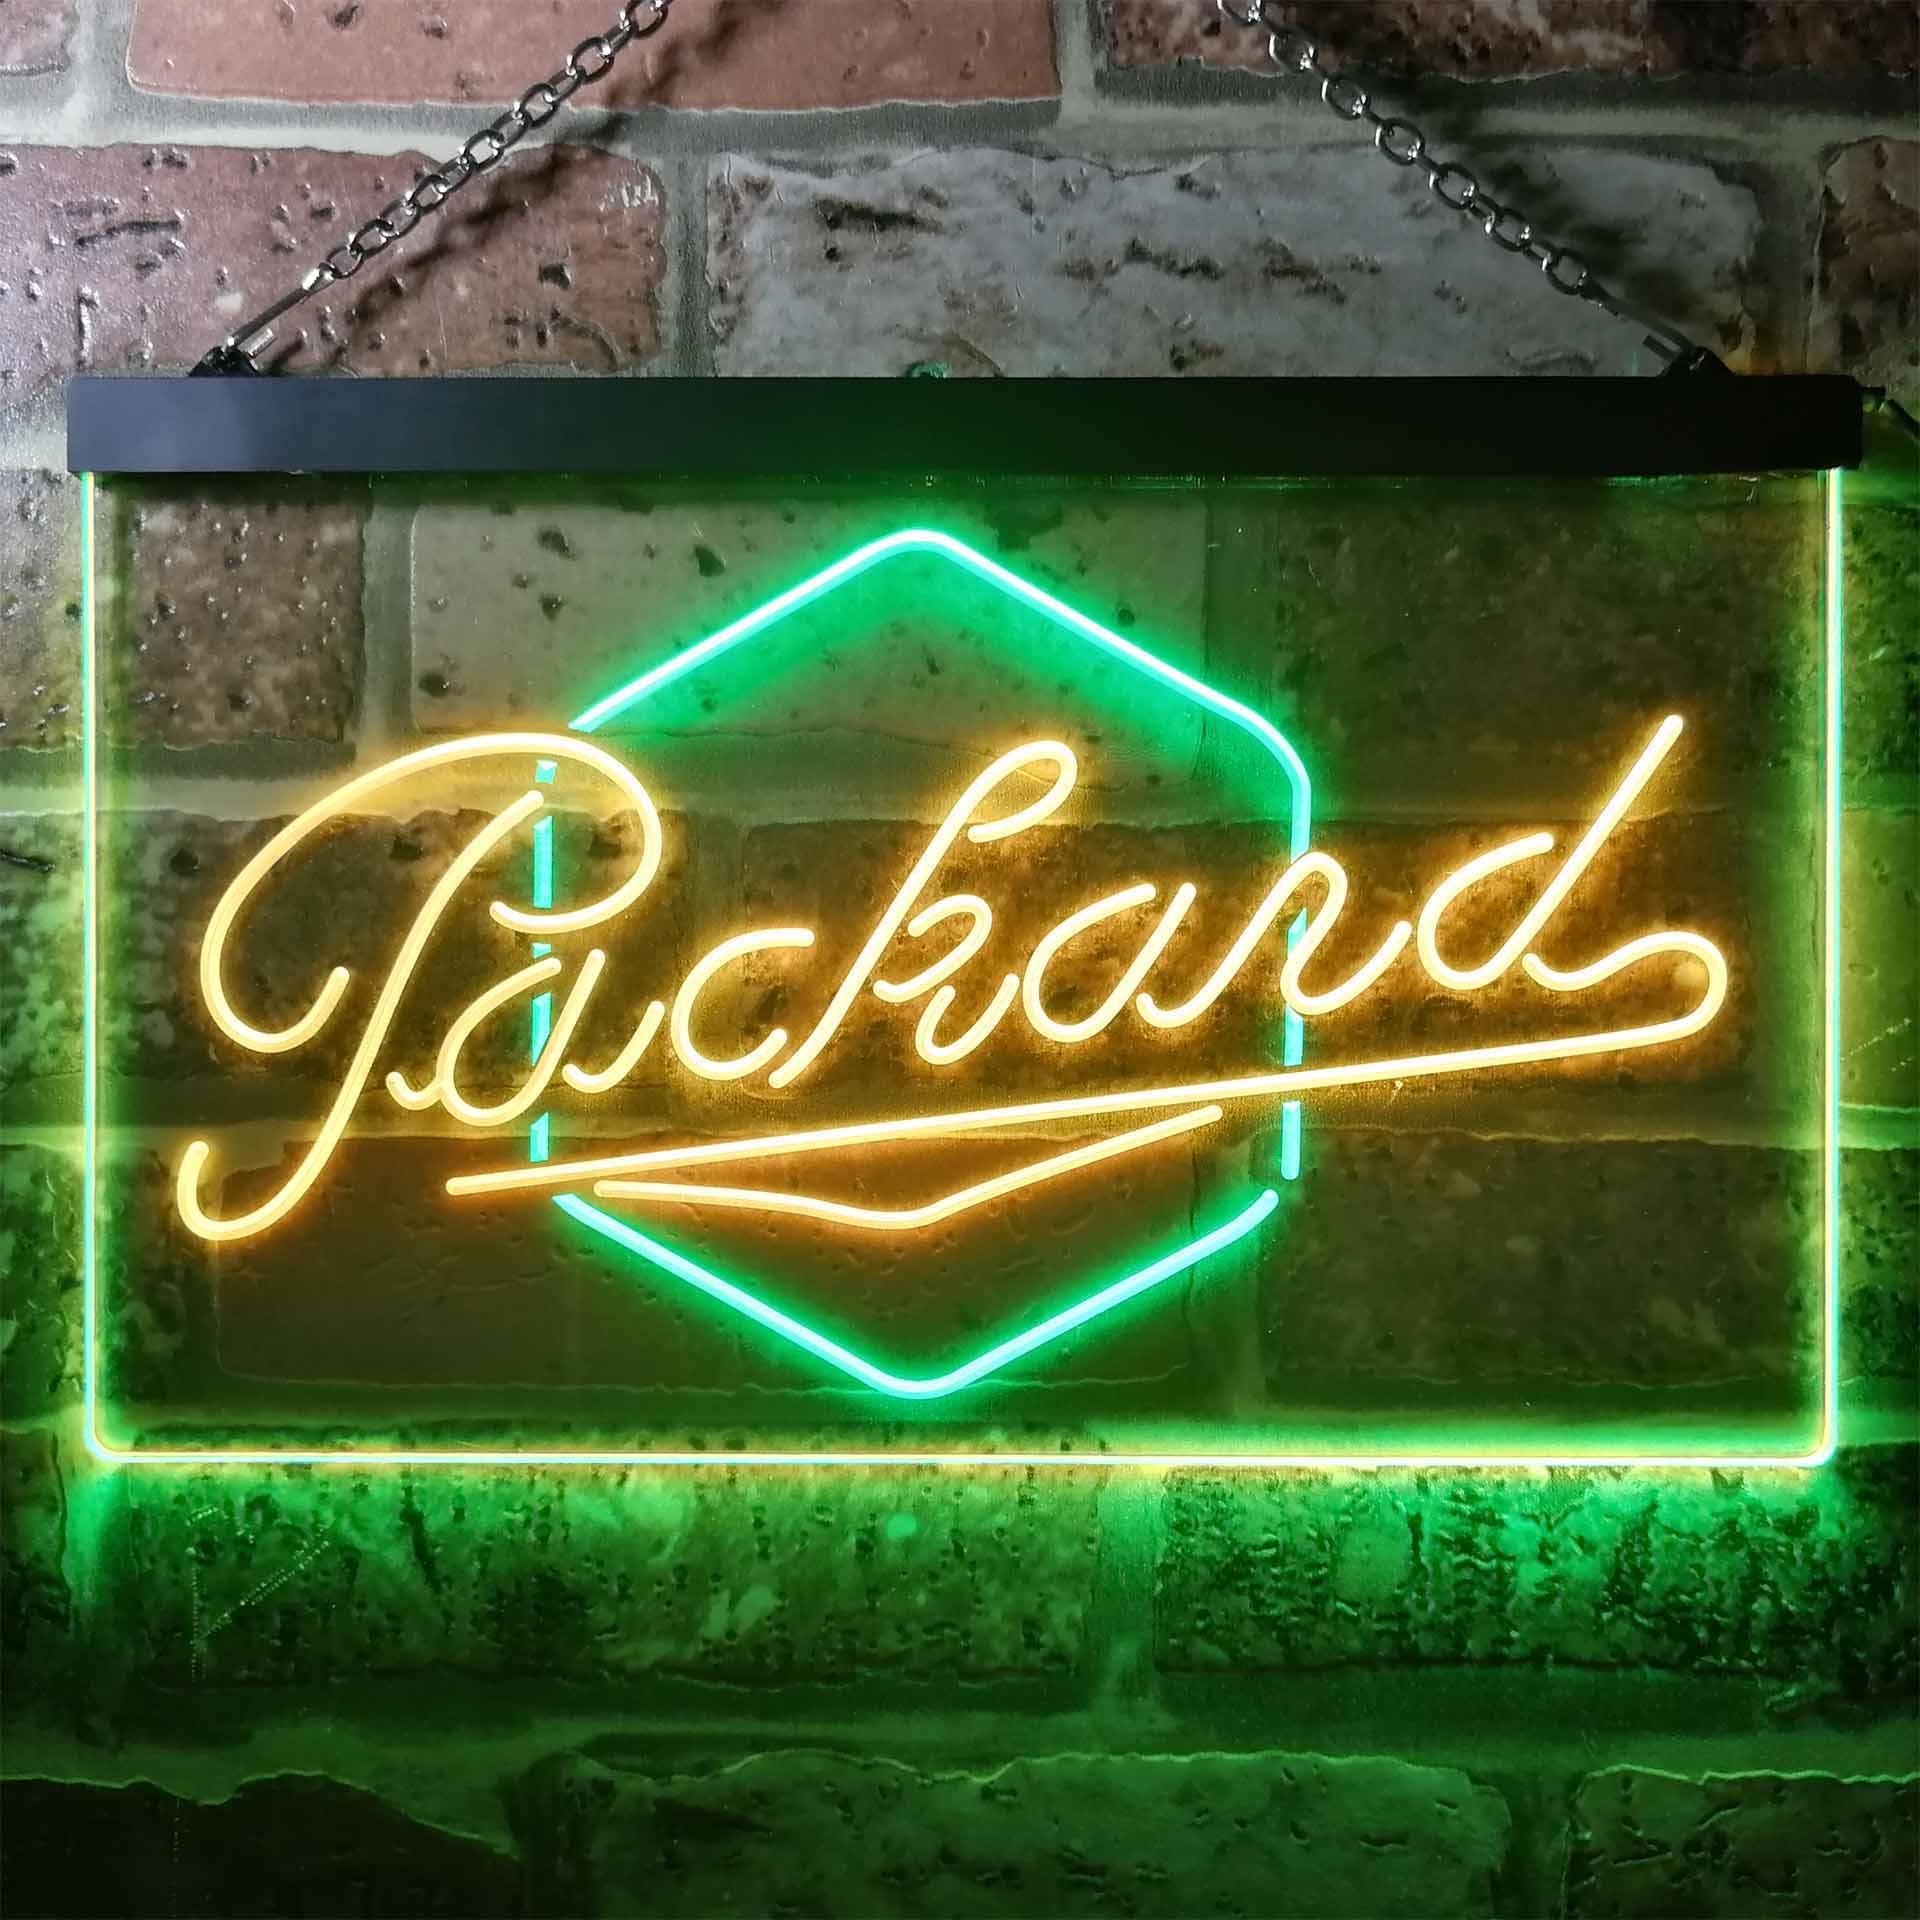 Packard Auto LED Neon Sign